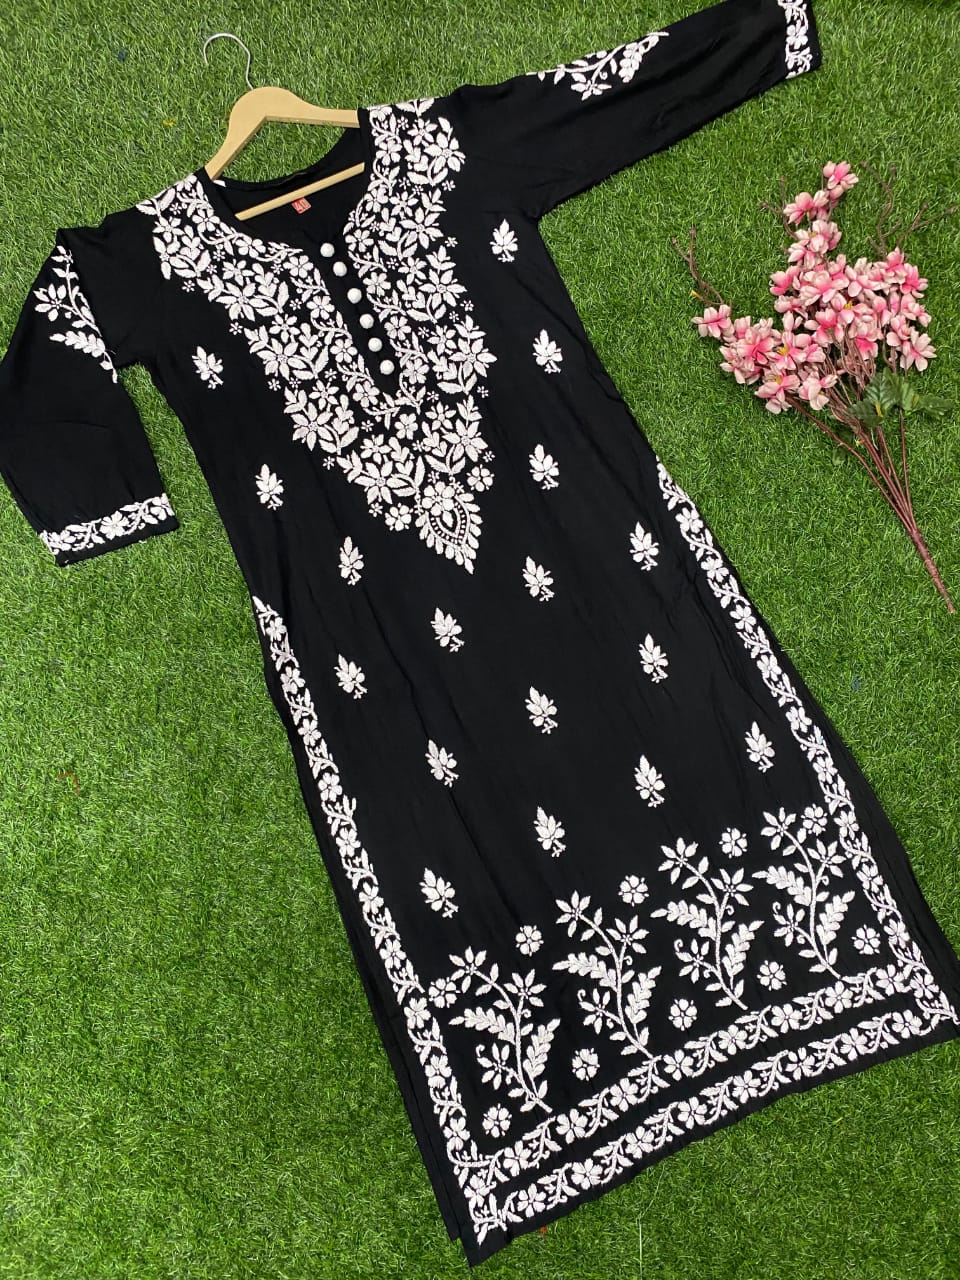 LCA Chikan Handicraft Lucknowi Latest Chiffon Kurti with Inner Lenth-44  Sleeve-3/4 Hand Wash at Rs 950 | Lucknow | ID: 25476799930